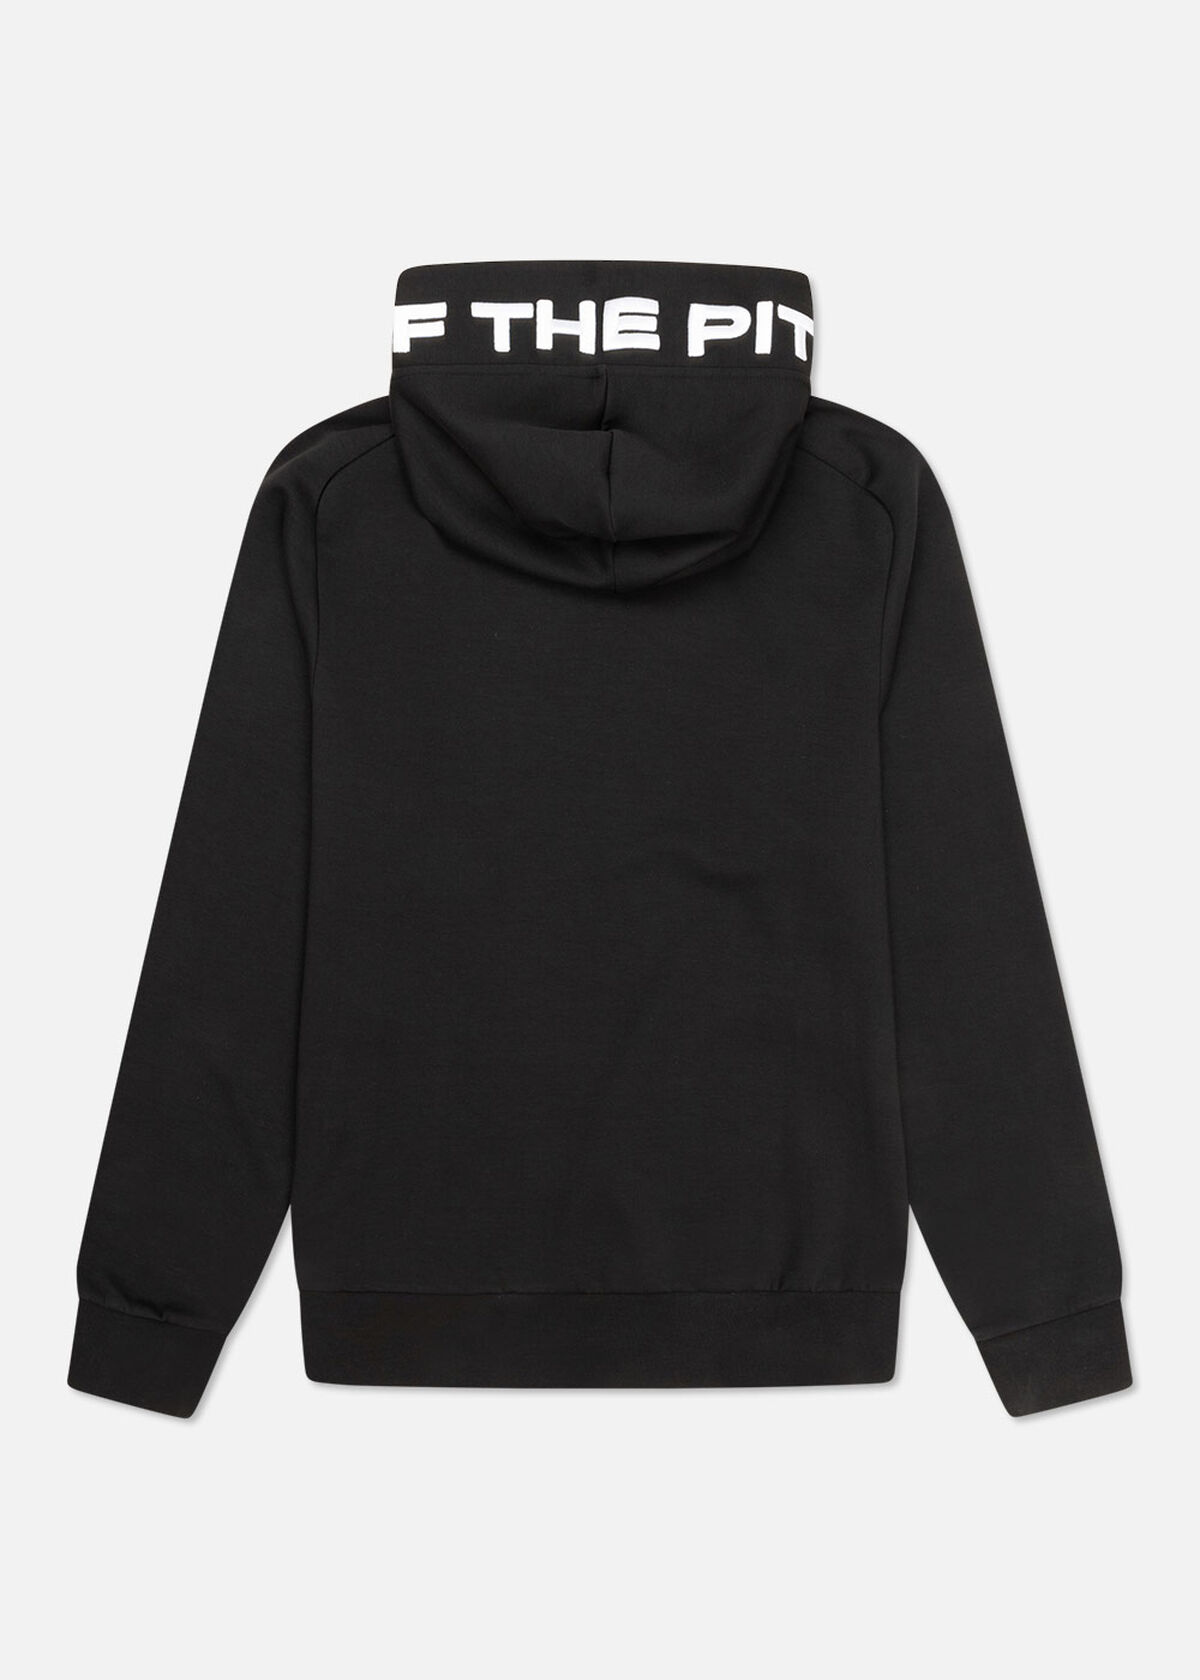 Private Pitch Hood - 75% Cotton / 20% Polyester / , Black, hi-res